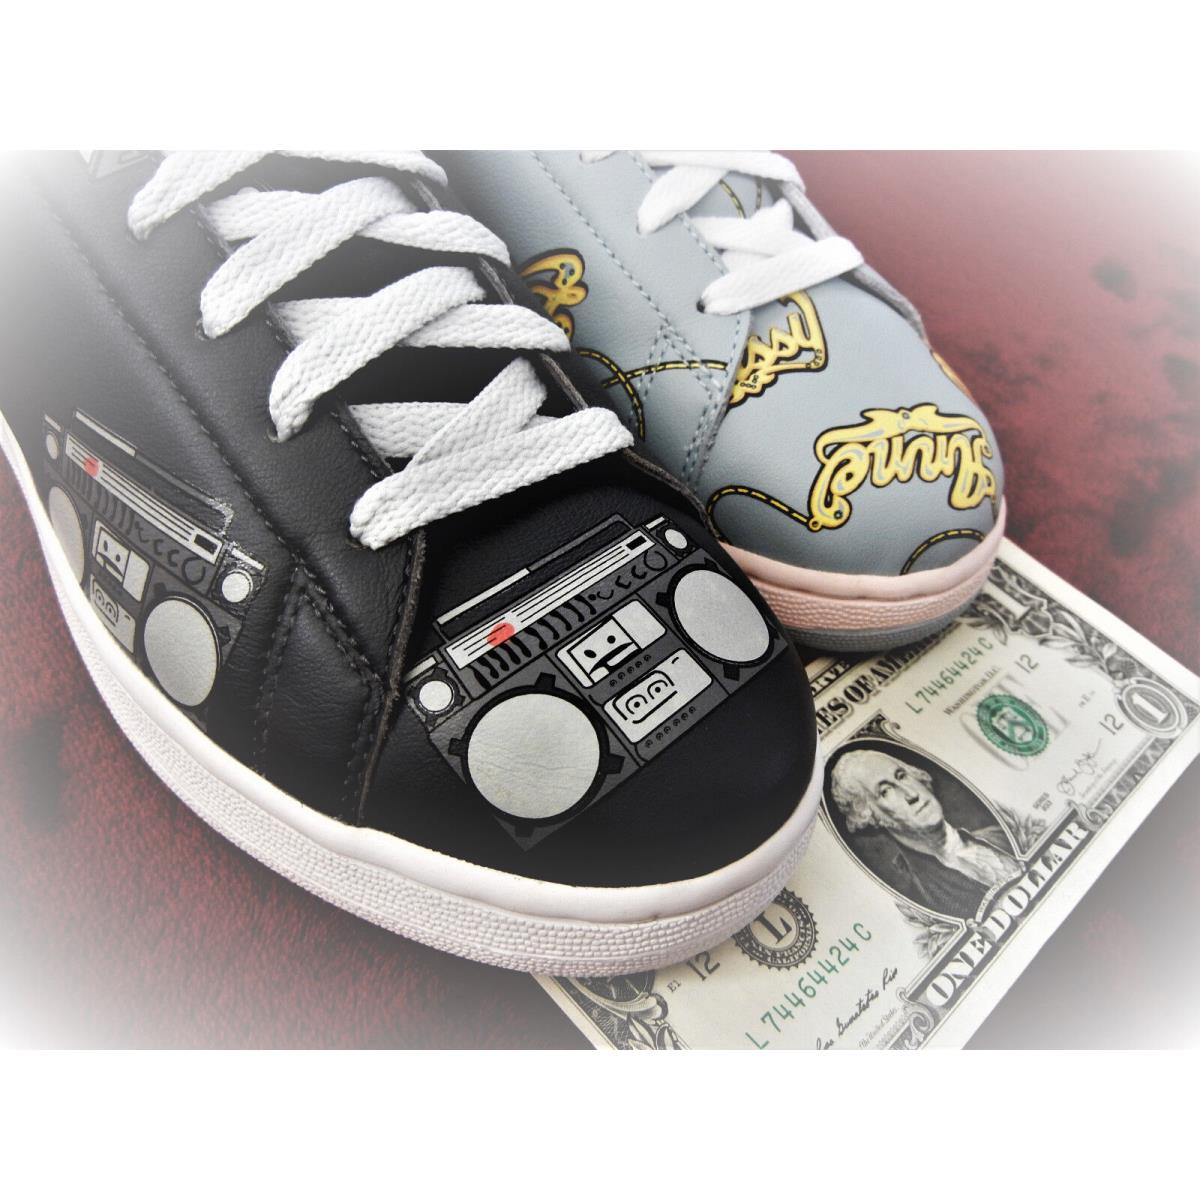 Reebok Ice Cream Felony no.464 Boombox Namechain Shoes Size 7.5 Boutiques DS